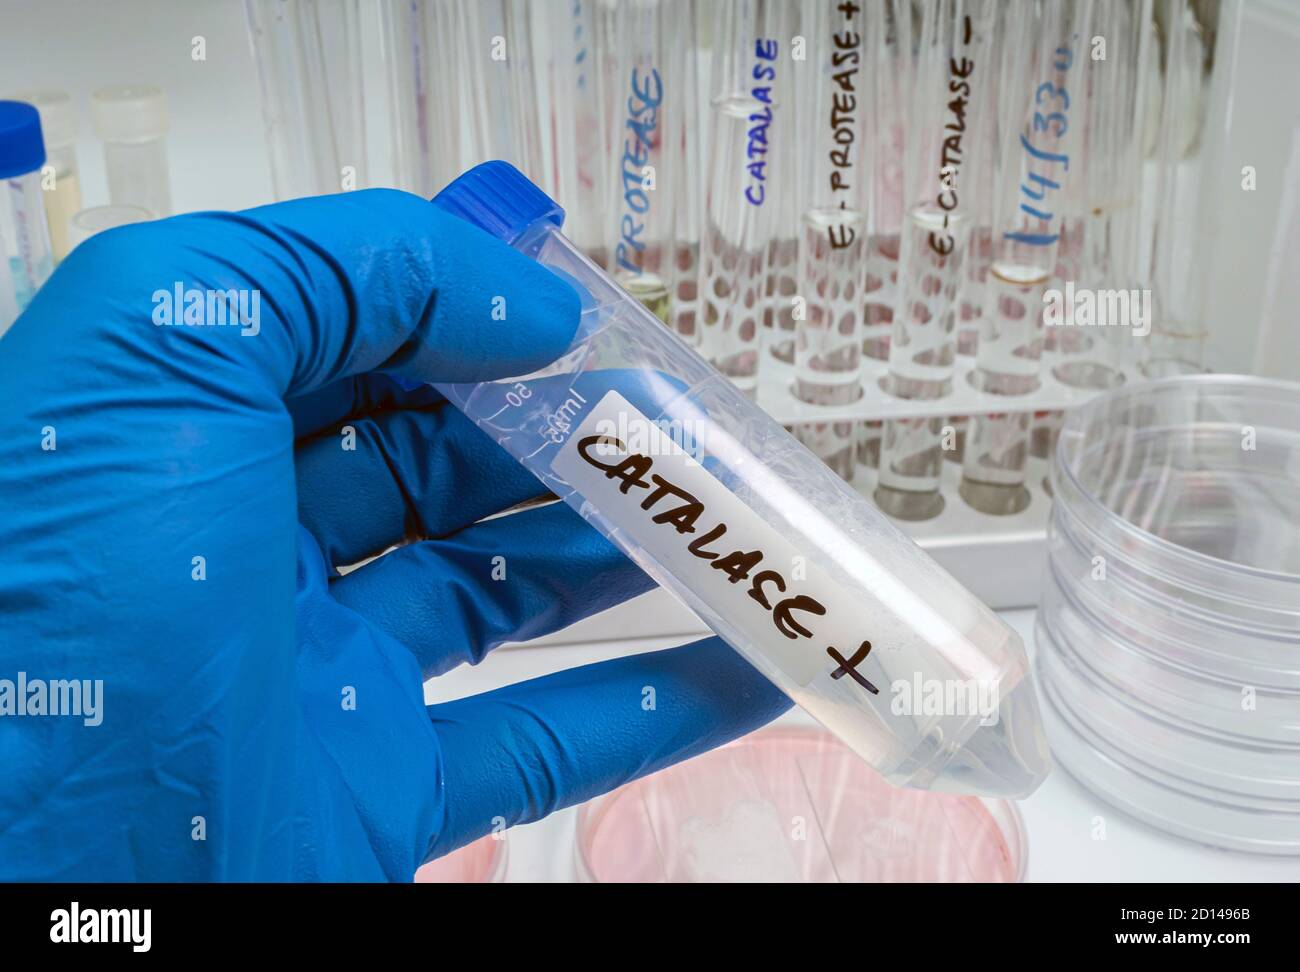 Scientist holds  vial with catalase enzyme that helps regulate  cytokine production, protects oxidative injury and suppresses SARS-CoV-2 replication, Stock Photo